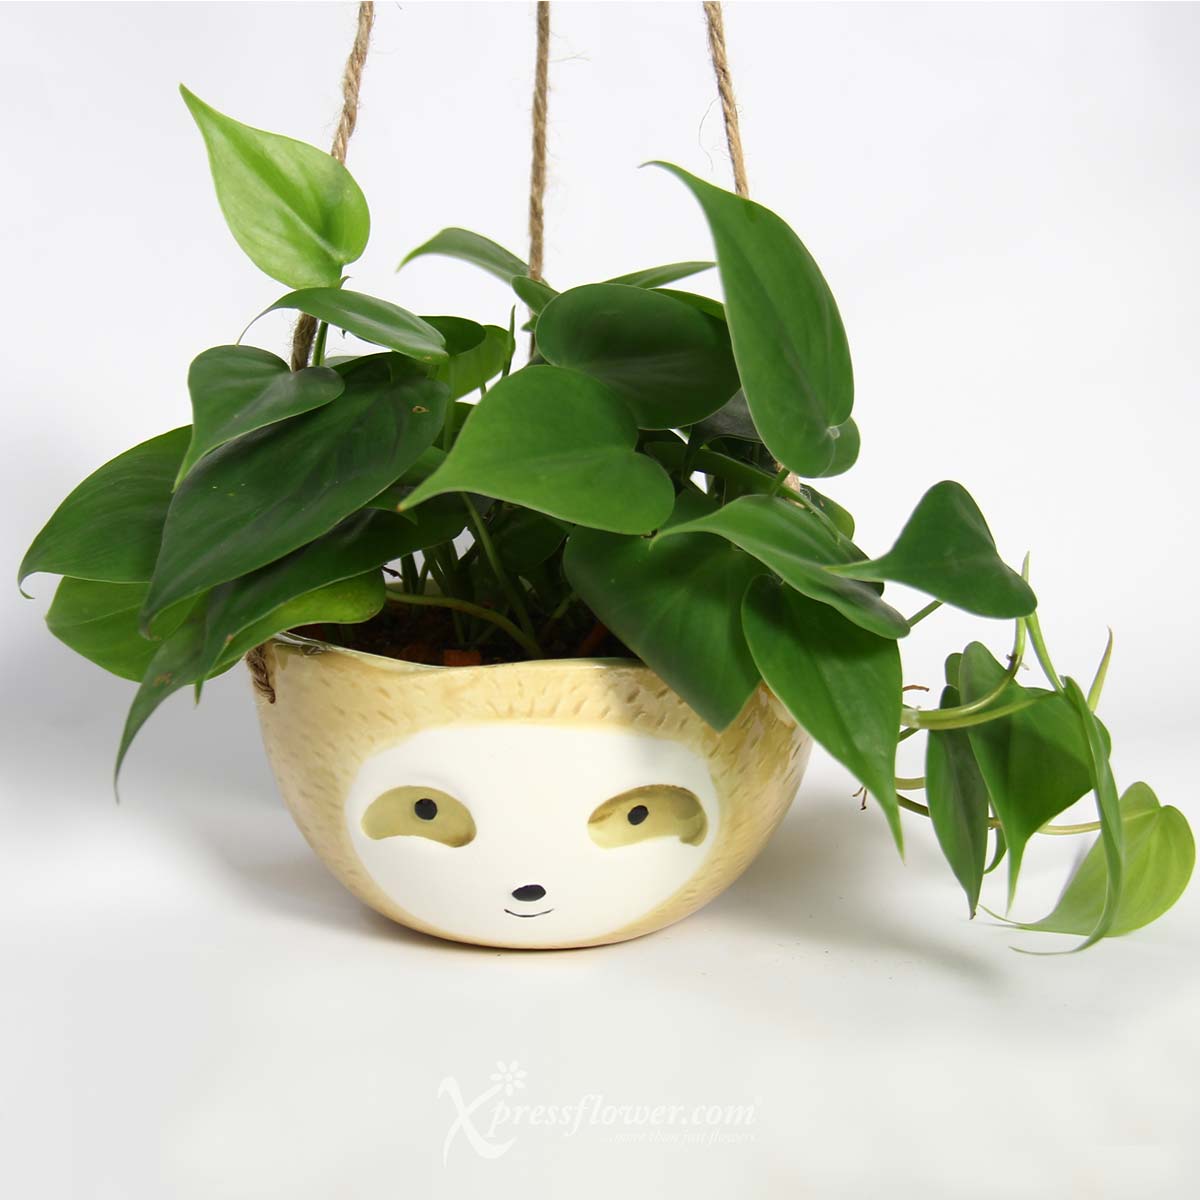 PS2118 Mr Cool Sloth (Philodendron Scandens Plant) 5a